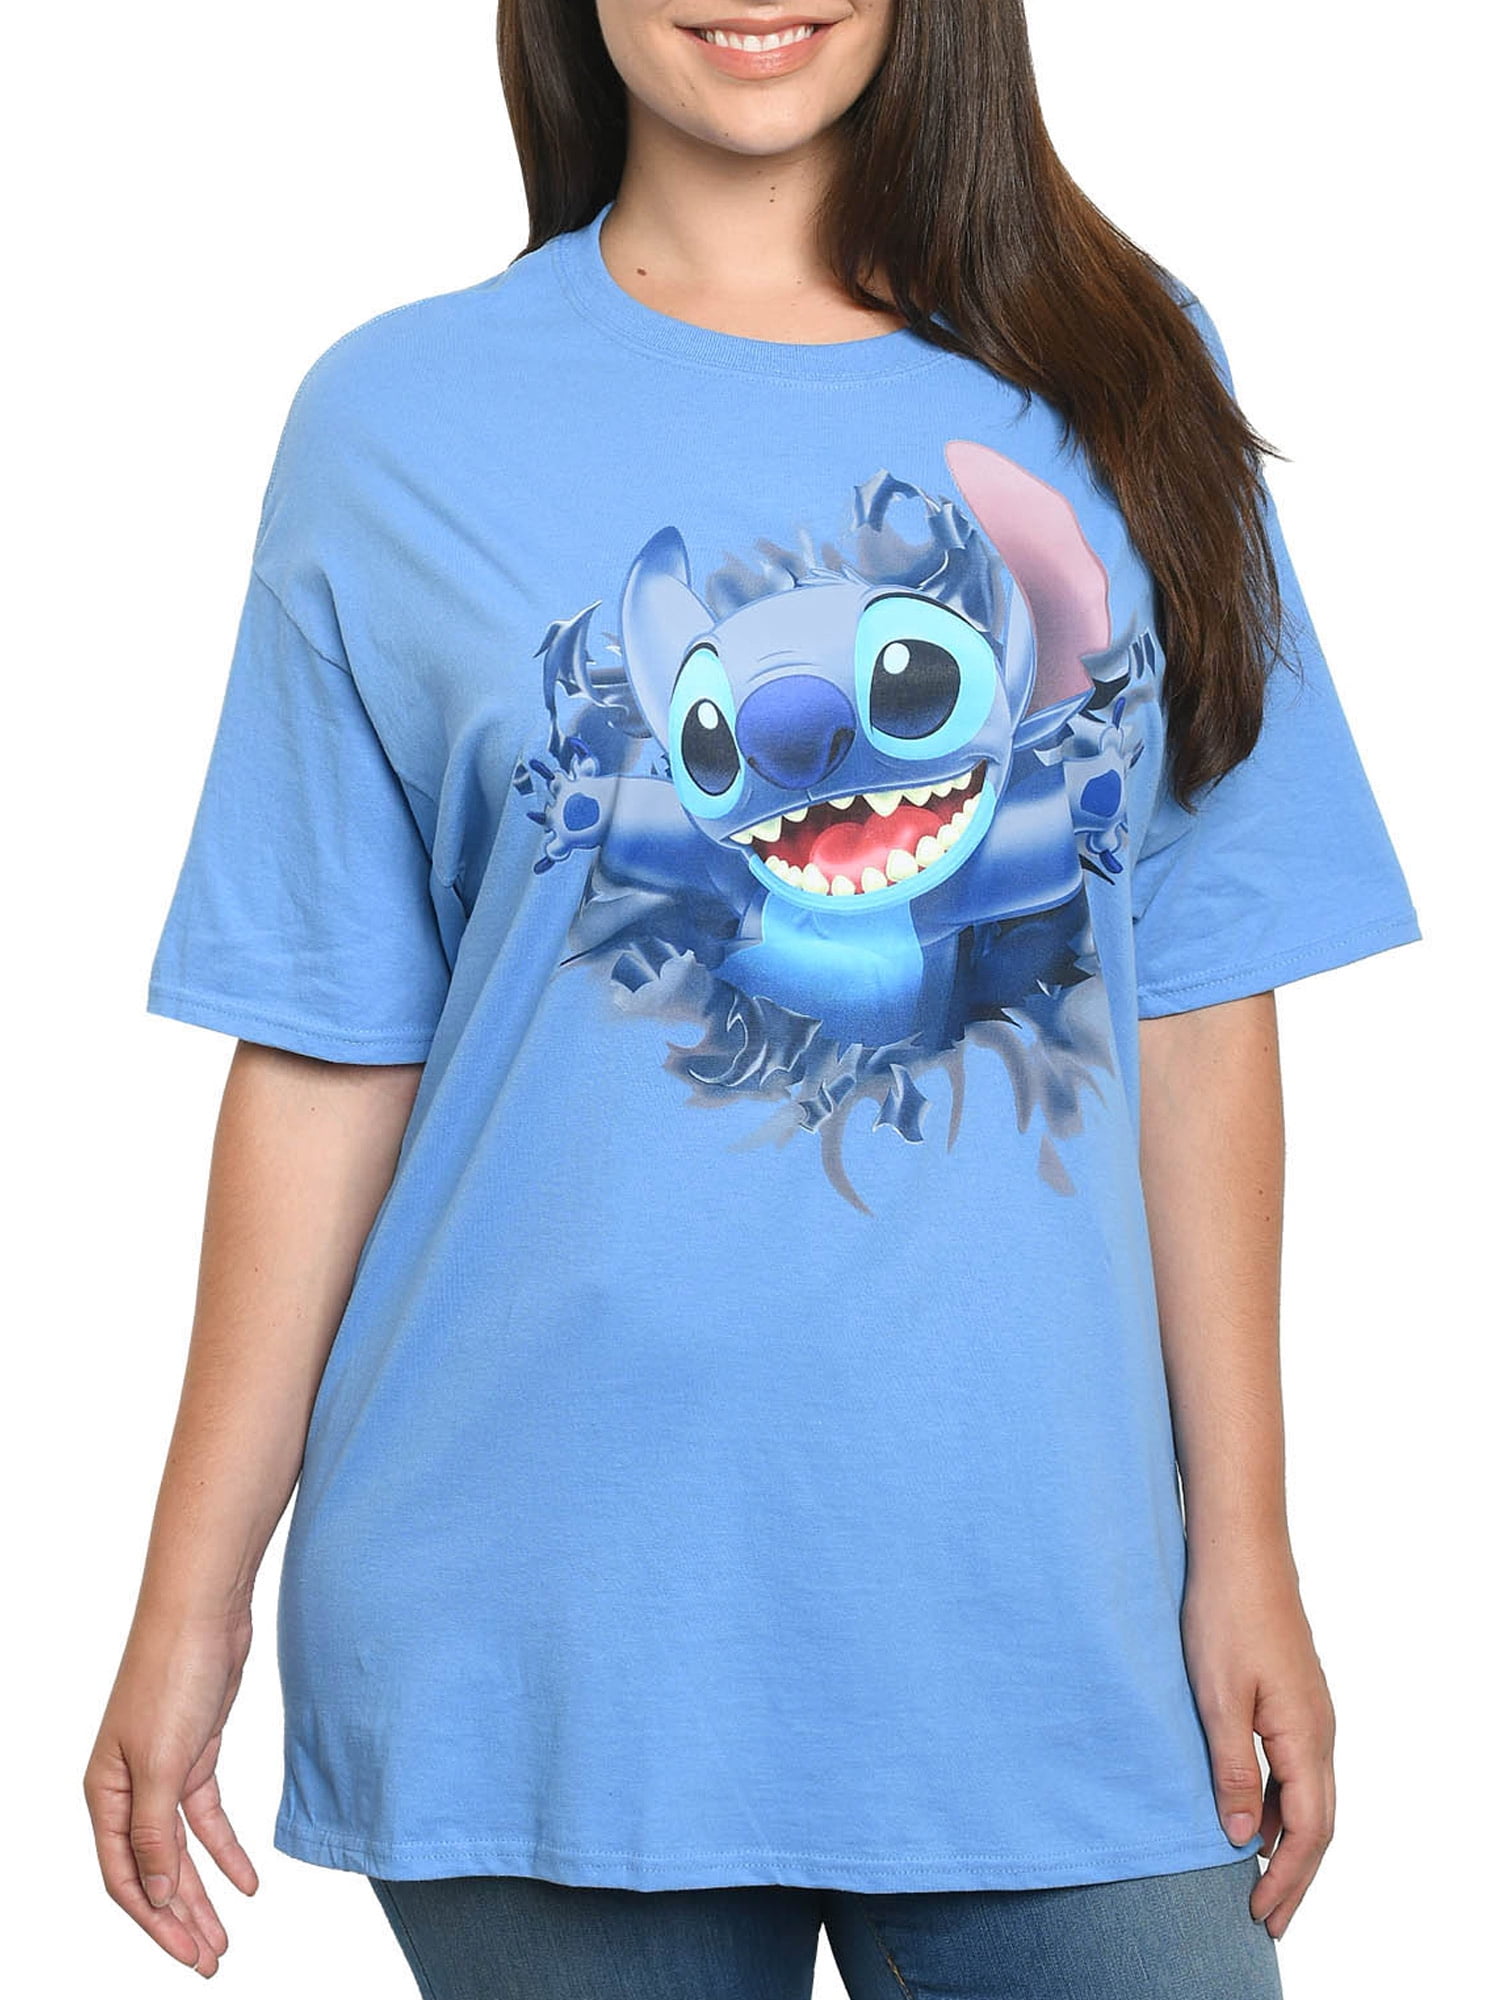 Disney Stitch T-Shirt Blue Front Back Design Women\'s (Size Small Only)